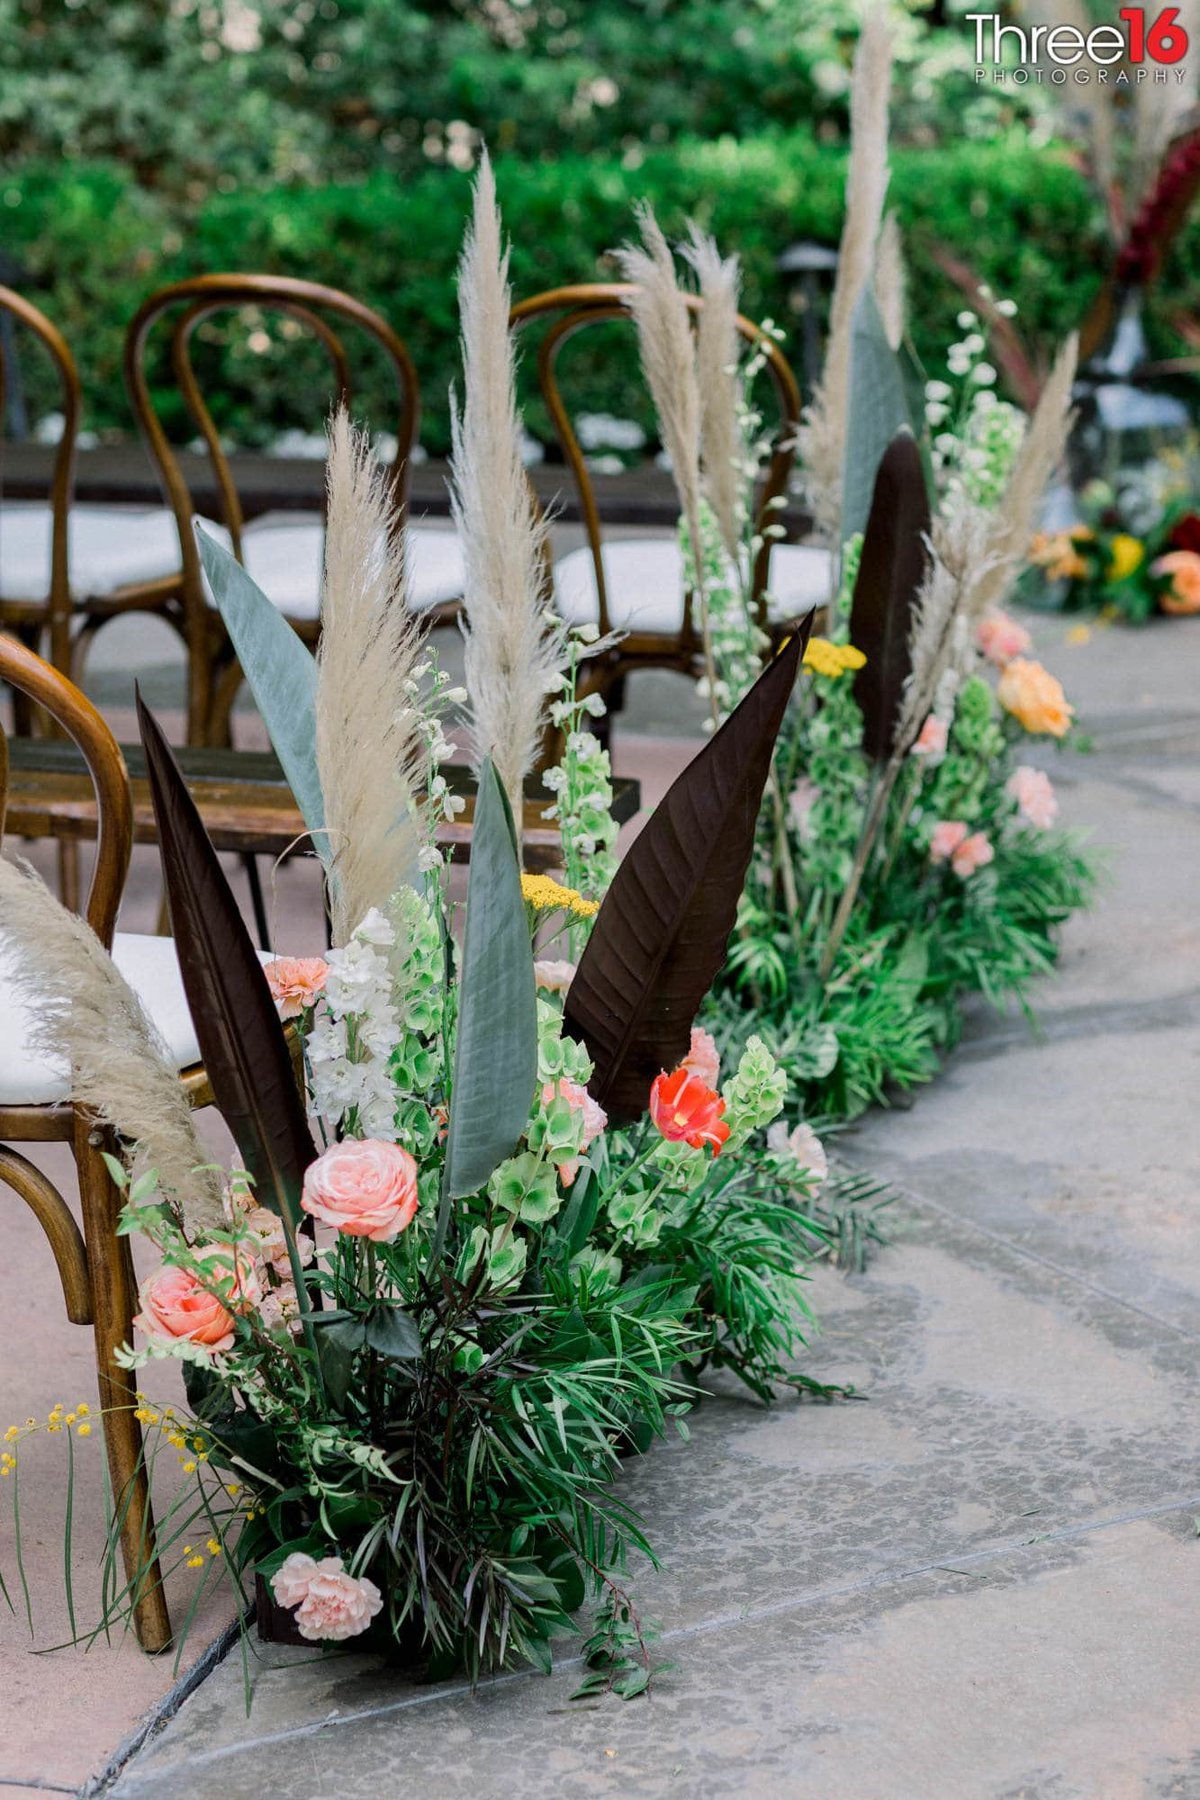 Amazing floral arraignments line the chairs at the wedding ceremony